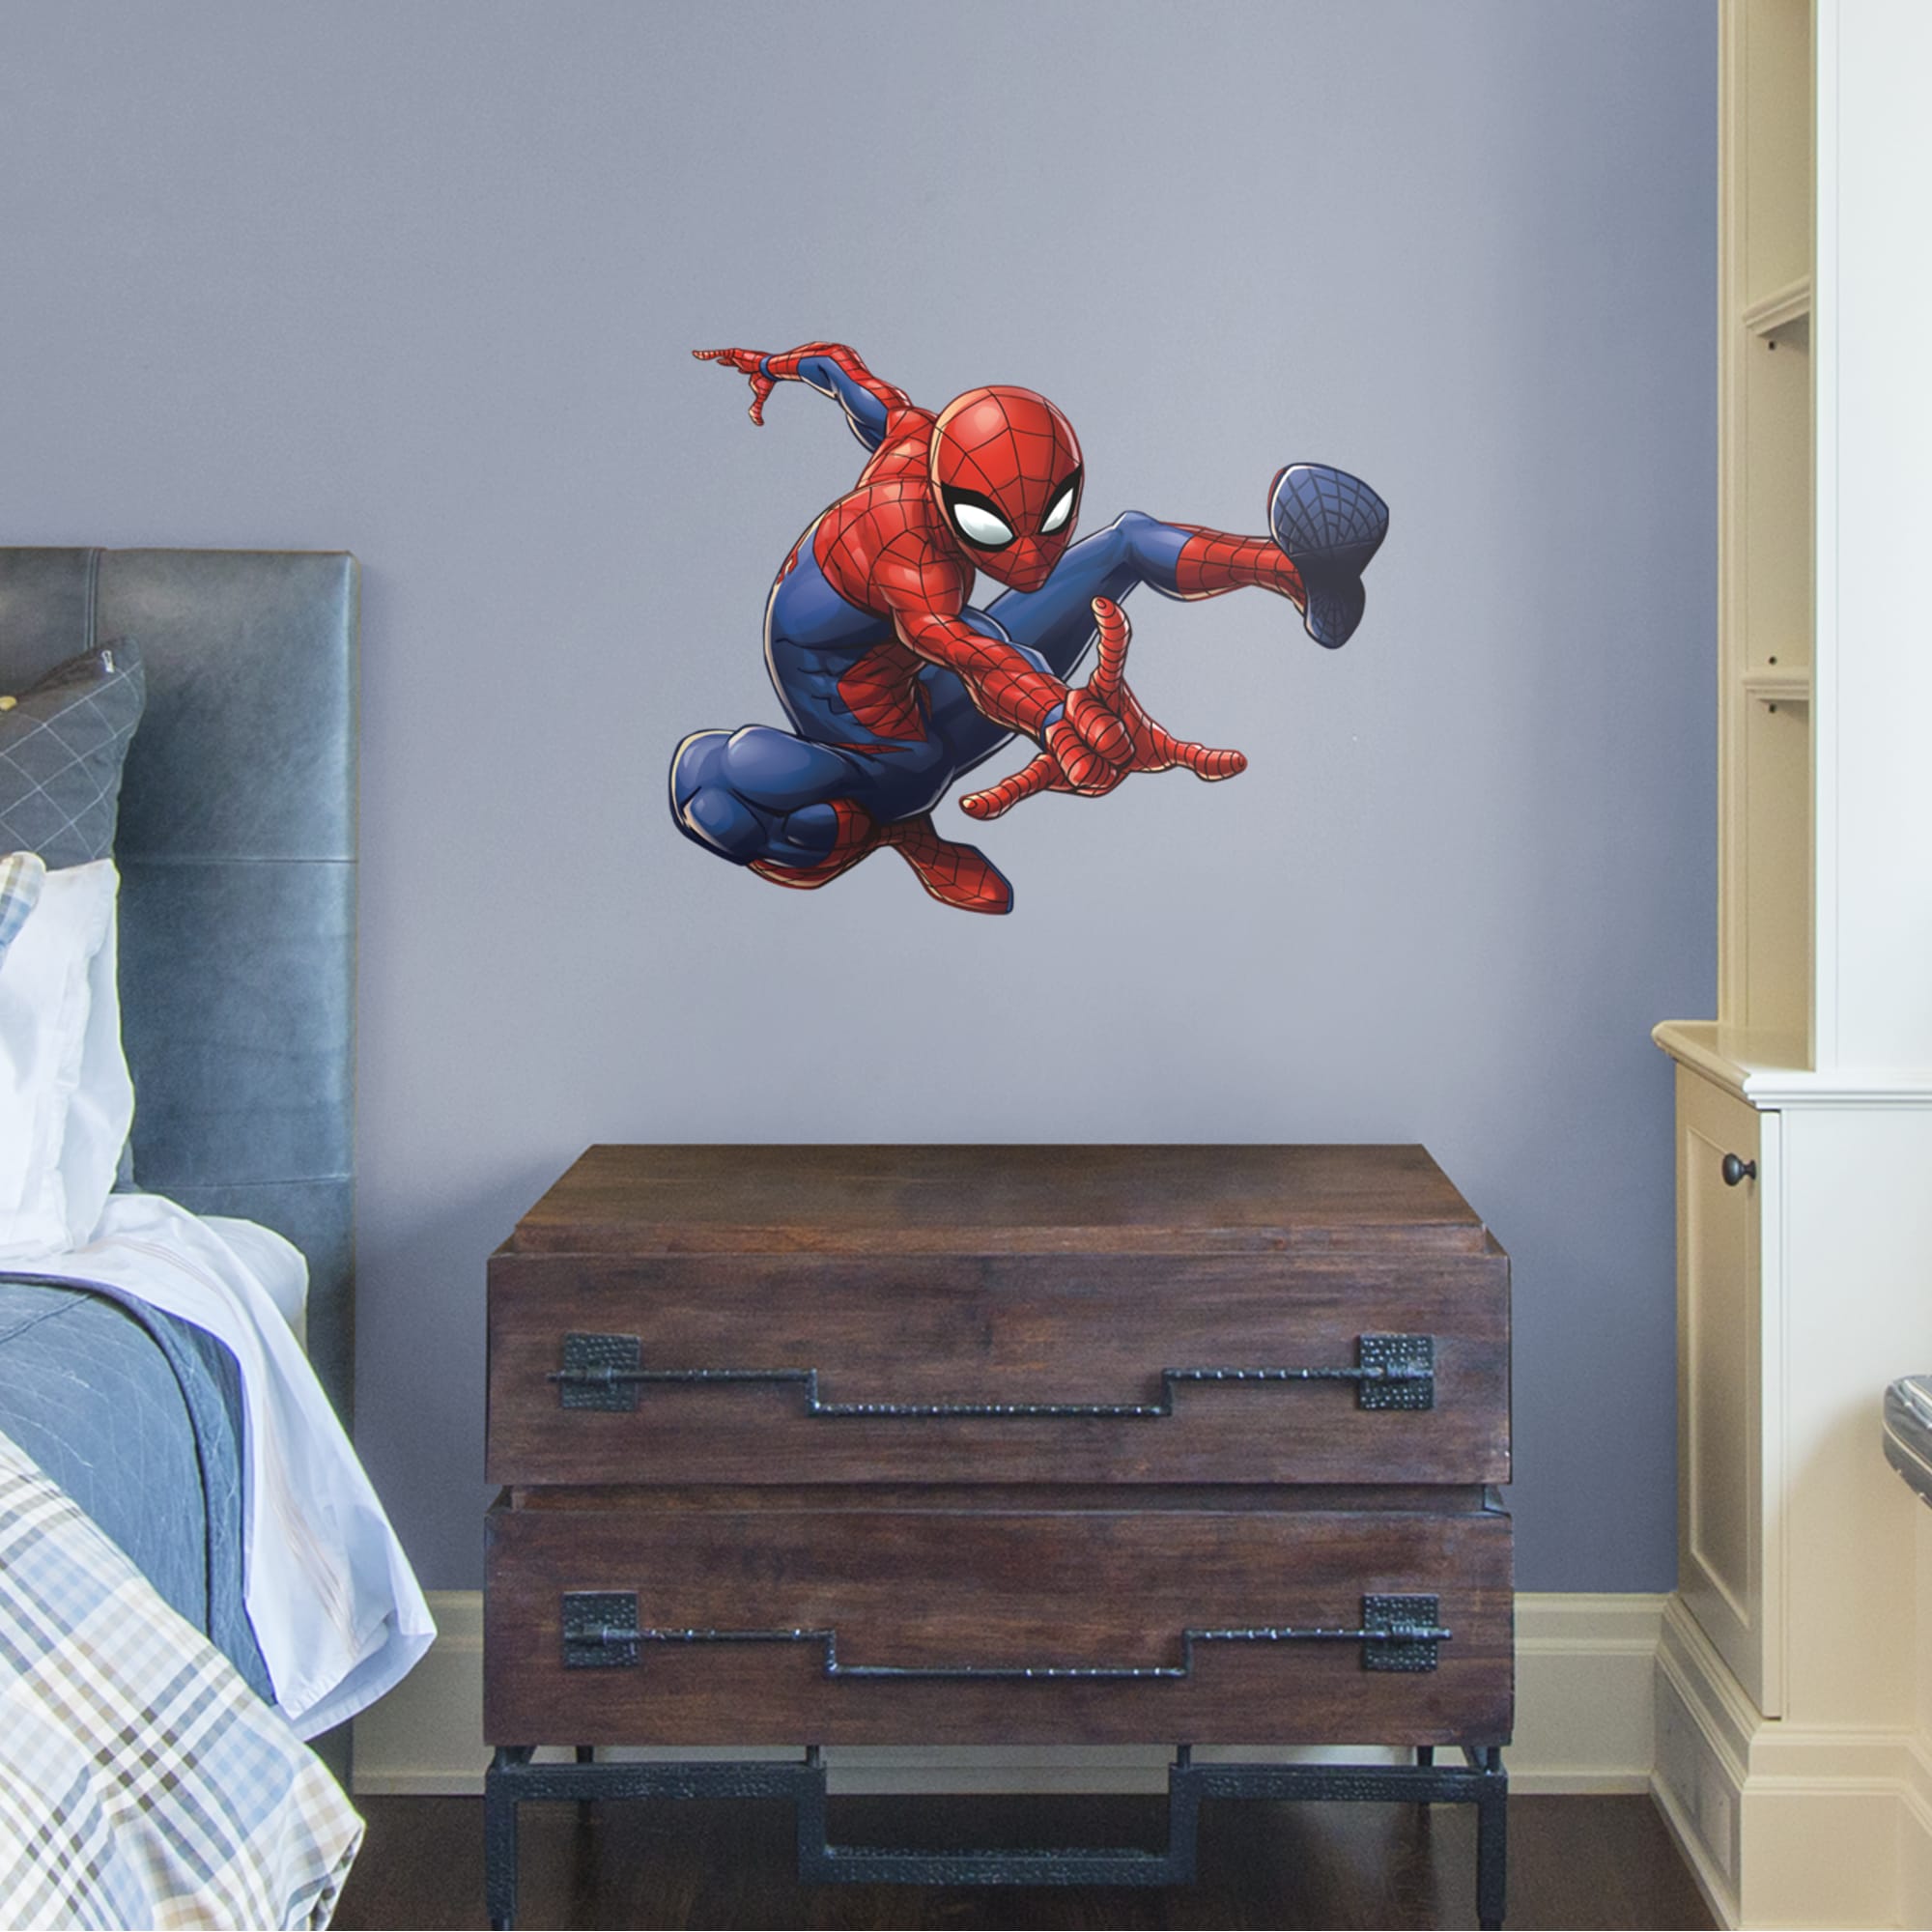 Spider-Man: Webslinger - Officially Licensed Removable Wall Decal 31.0"W x 25.0"H by Fathead | Vinyl